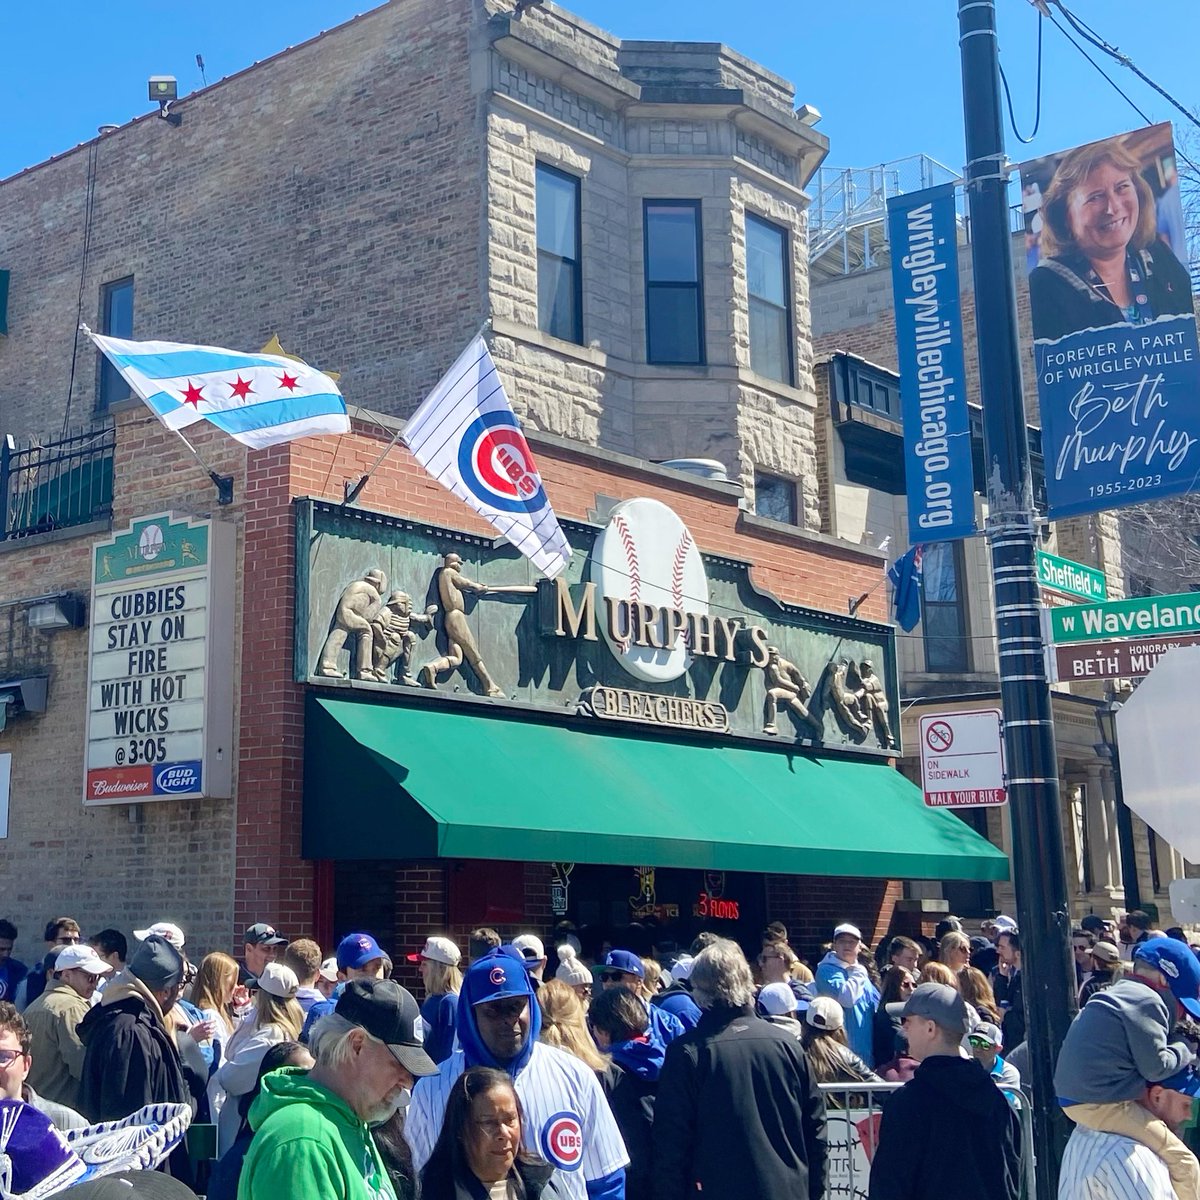 It’s a party on our corner of Waveland and Sheffield 🍻 We love soaking up the early April baseball vibes with you ☀️⚾️ Dodgers - Cubs @ 3:05.

#chicagocubs #chicagocubsbaseball #chicagocubsfan #chicagocubs🐻 #gocubsgo #gocubs #gocubsgo #cubs #cubsbaseball ##murphysbleachers